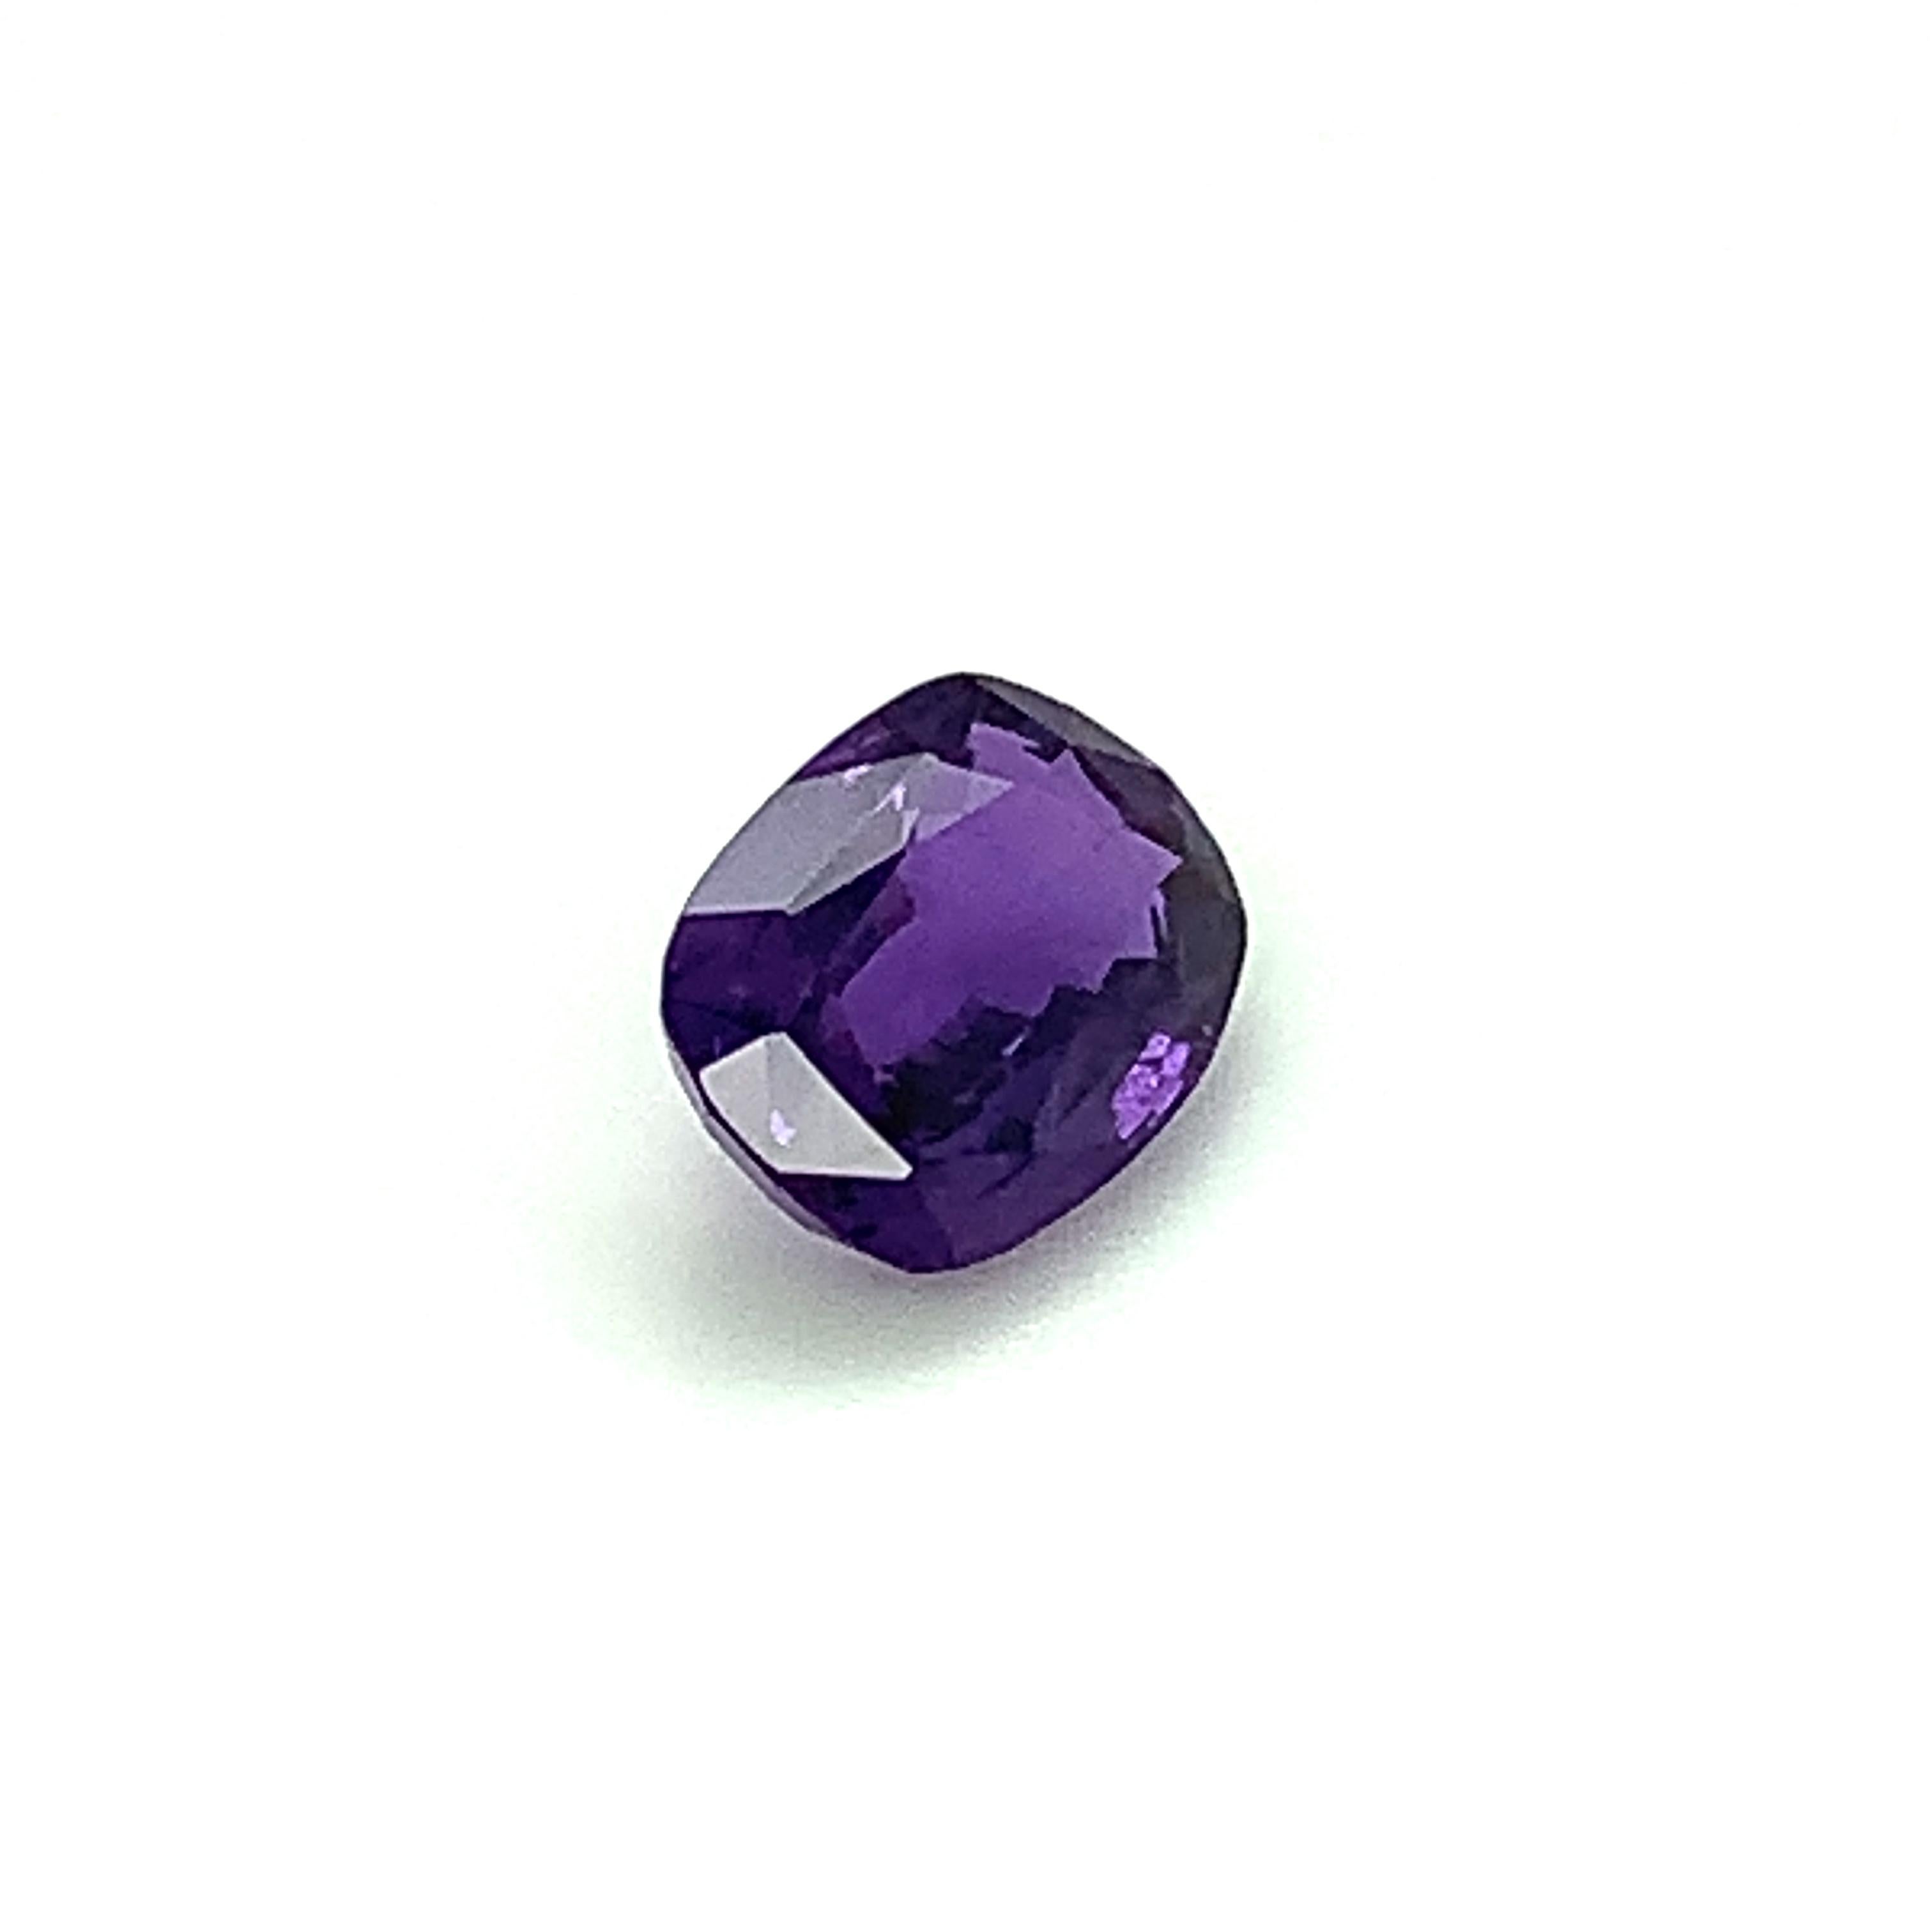 Cushion Cut Unheated 3.50 Carat Color Change Sapphire, Unset Loose Gemstone, GIA Certified For Sale